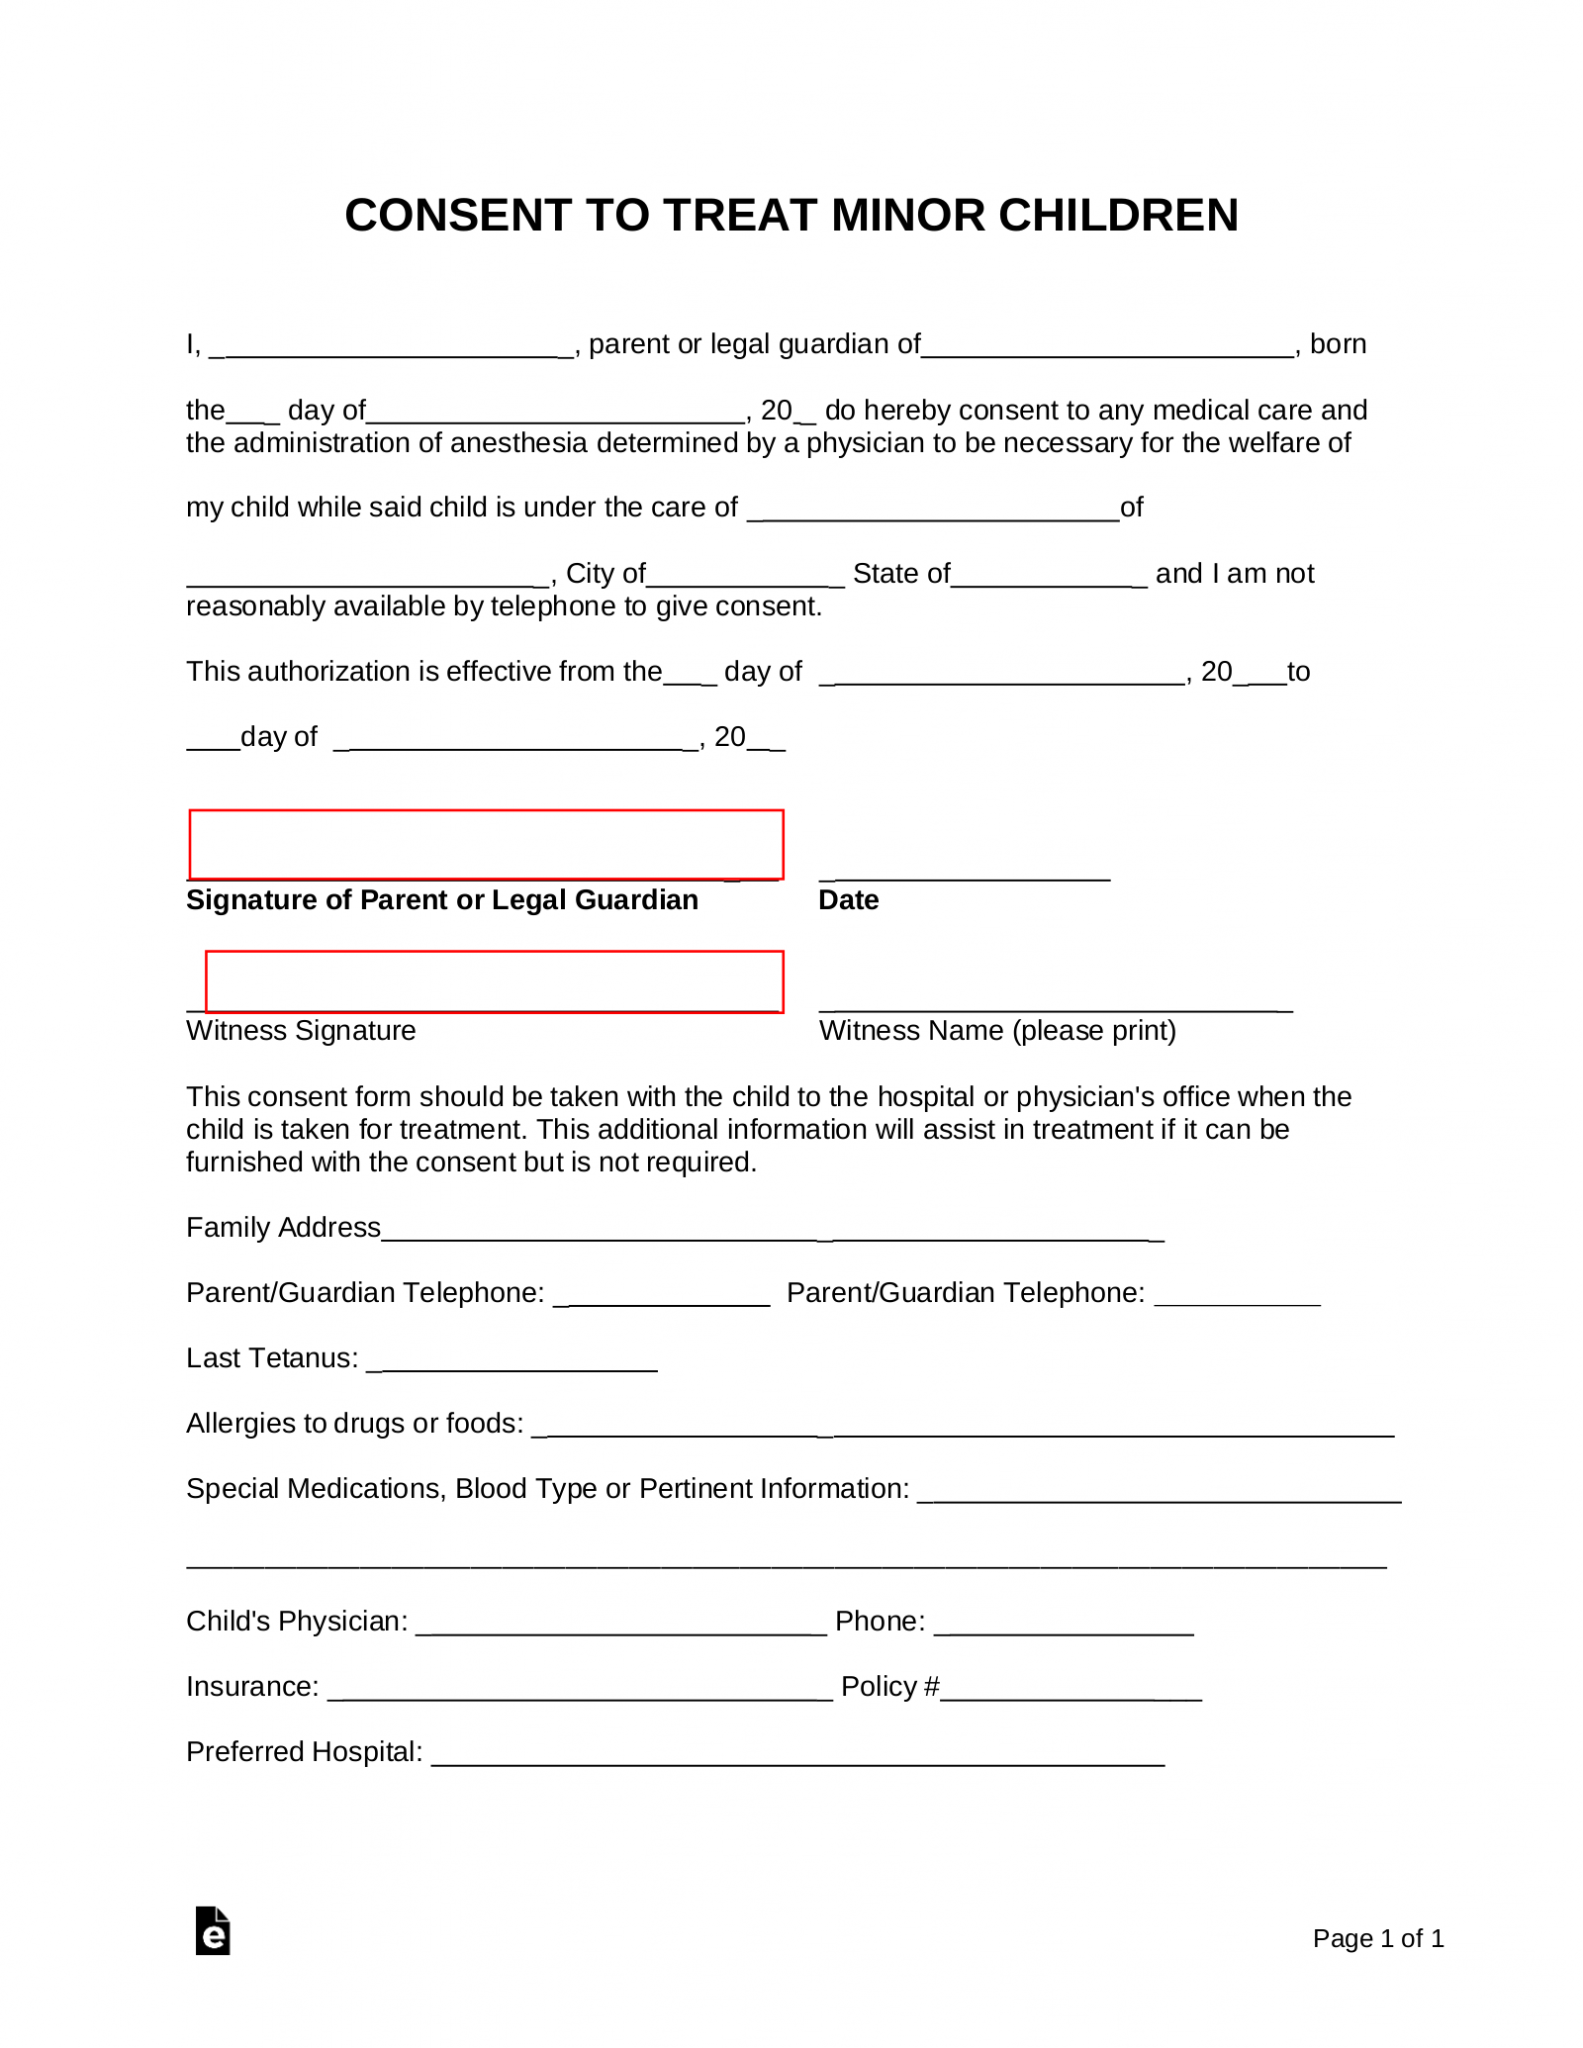 printable-medical-consent-form-for-minor-while-parents-are-away